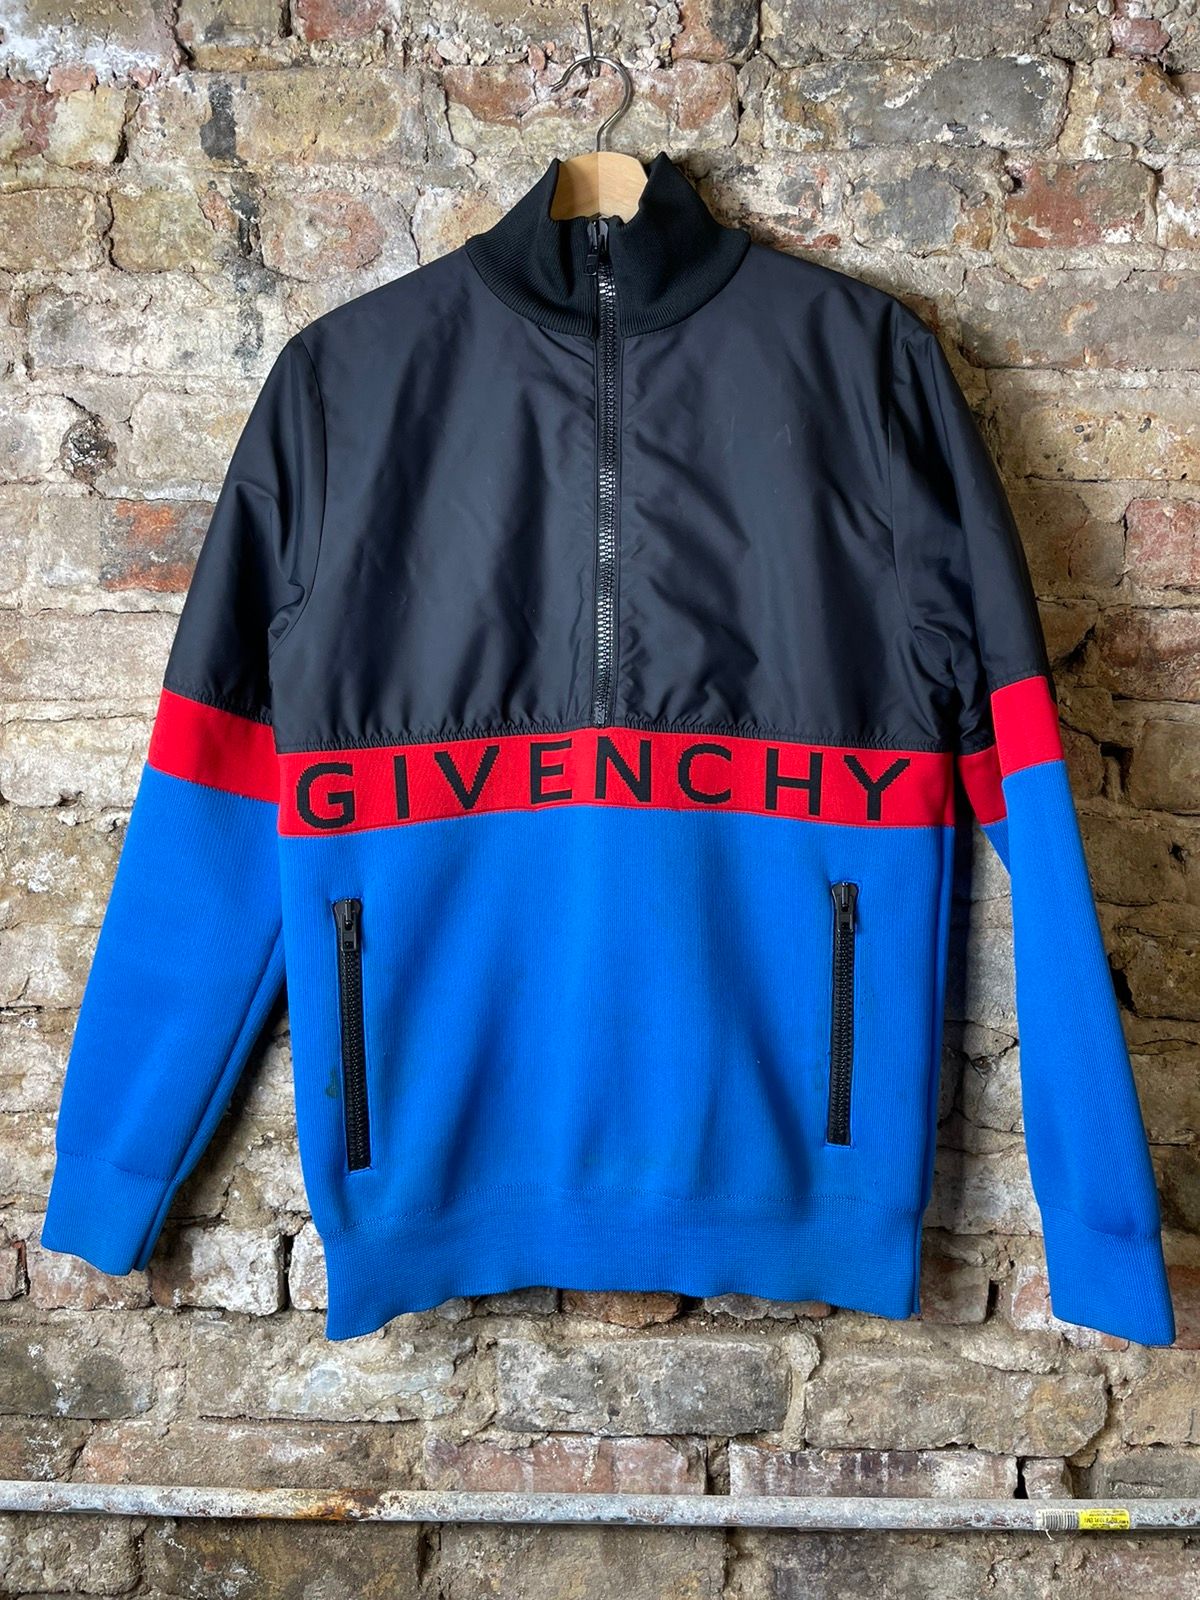 Pre-owned Givenchy Jacket Size M Used In Blue